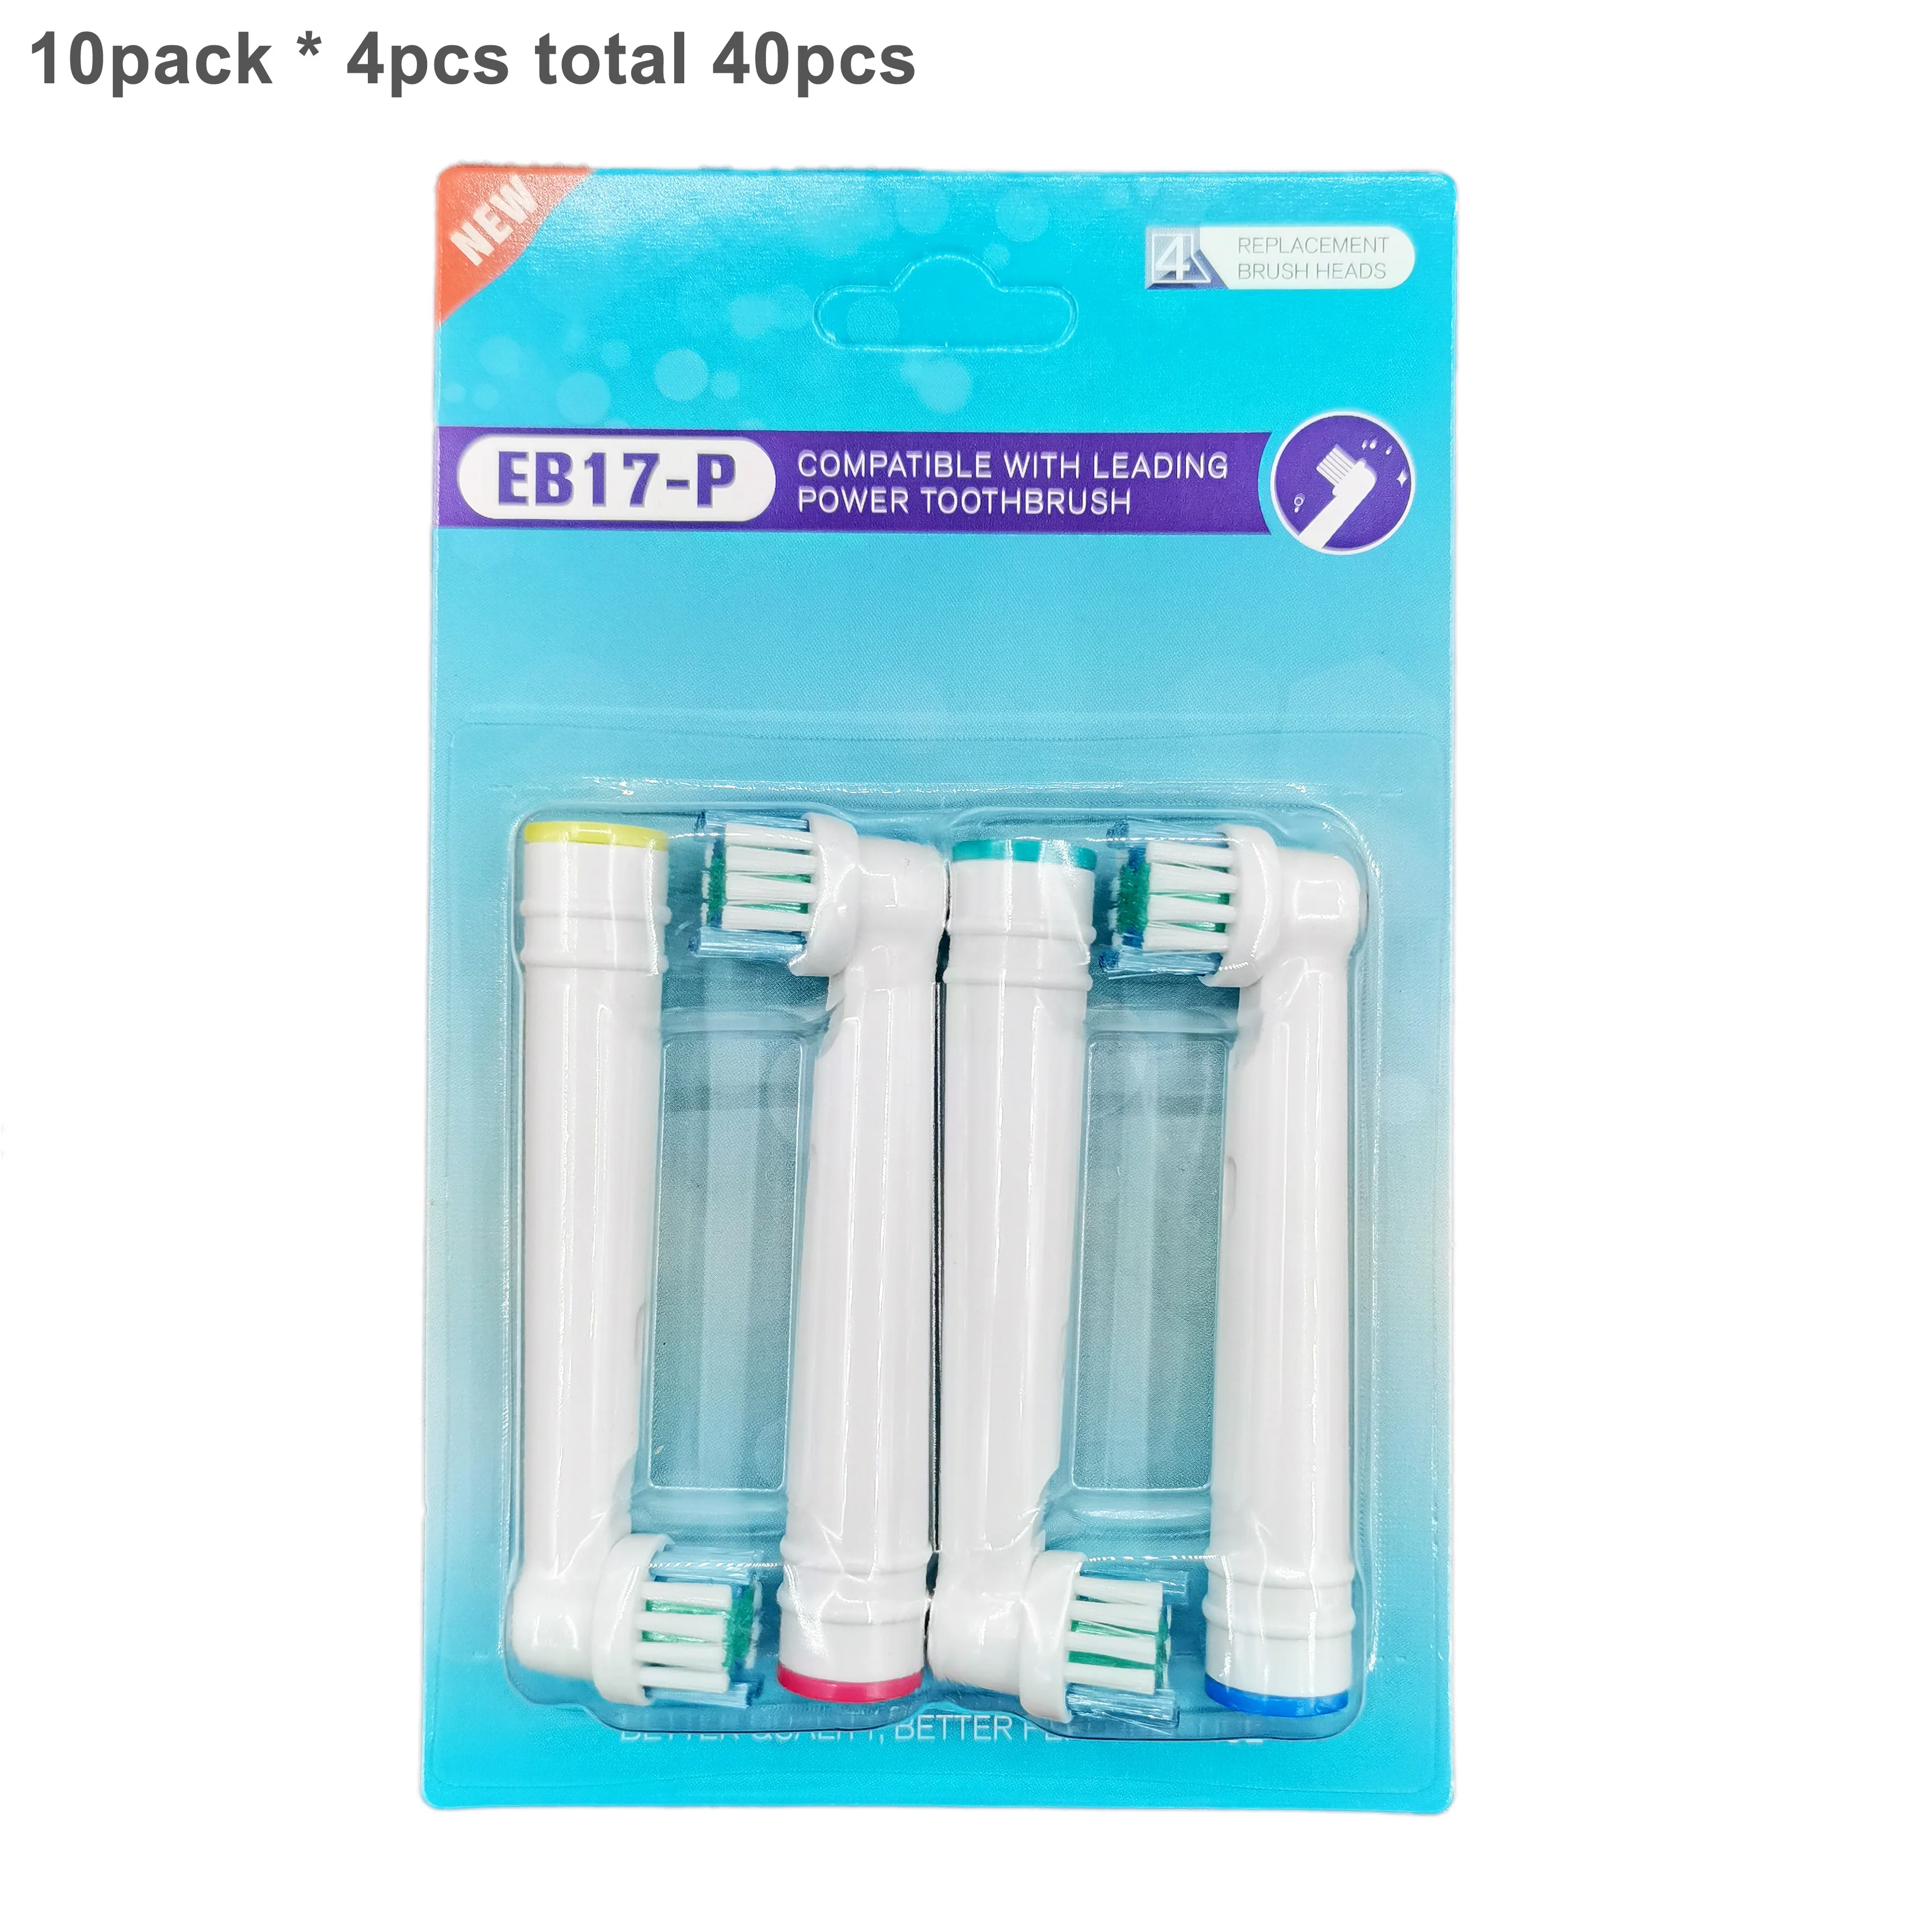 

40pcs VIP Tu for Oral B Electric Toothbrush Replacement Brush Heads, Sensitive brush heads Extra soft bristles D25 D30 D32